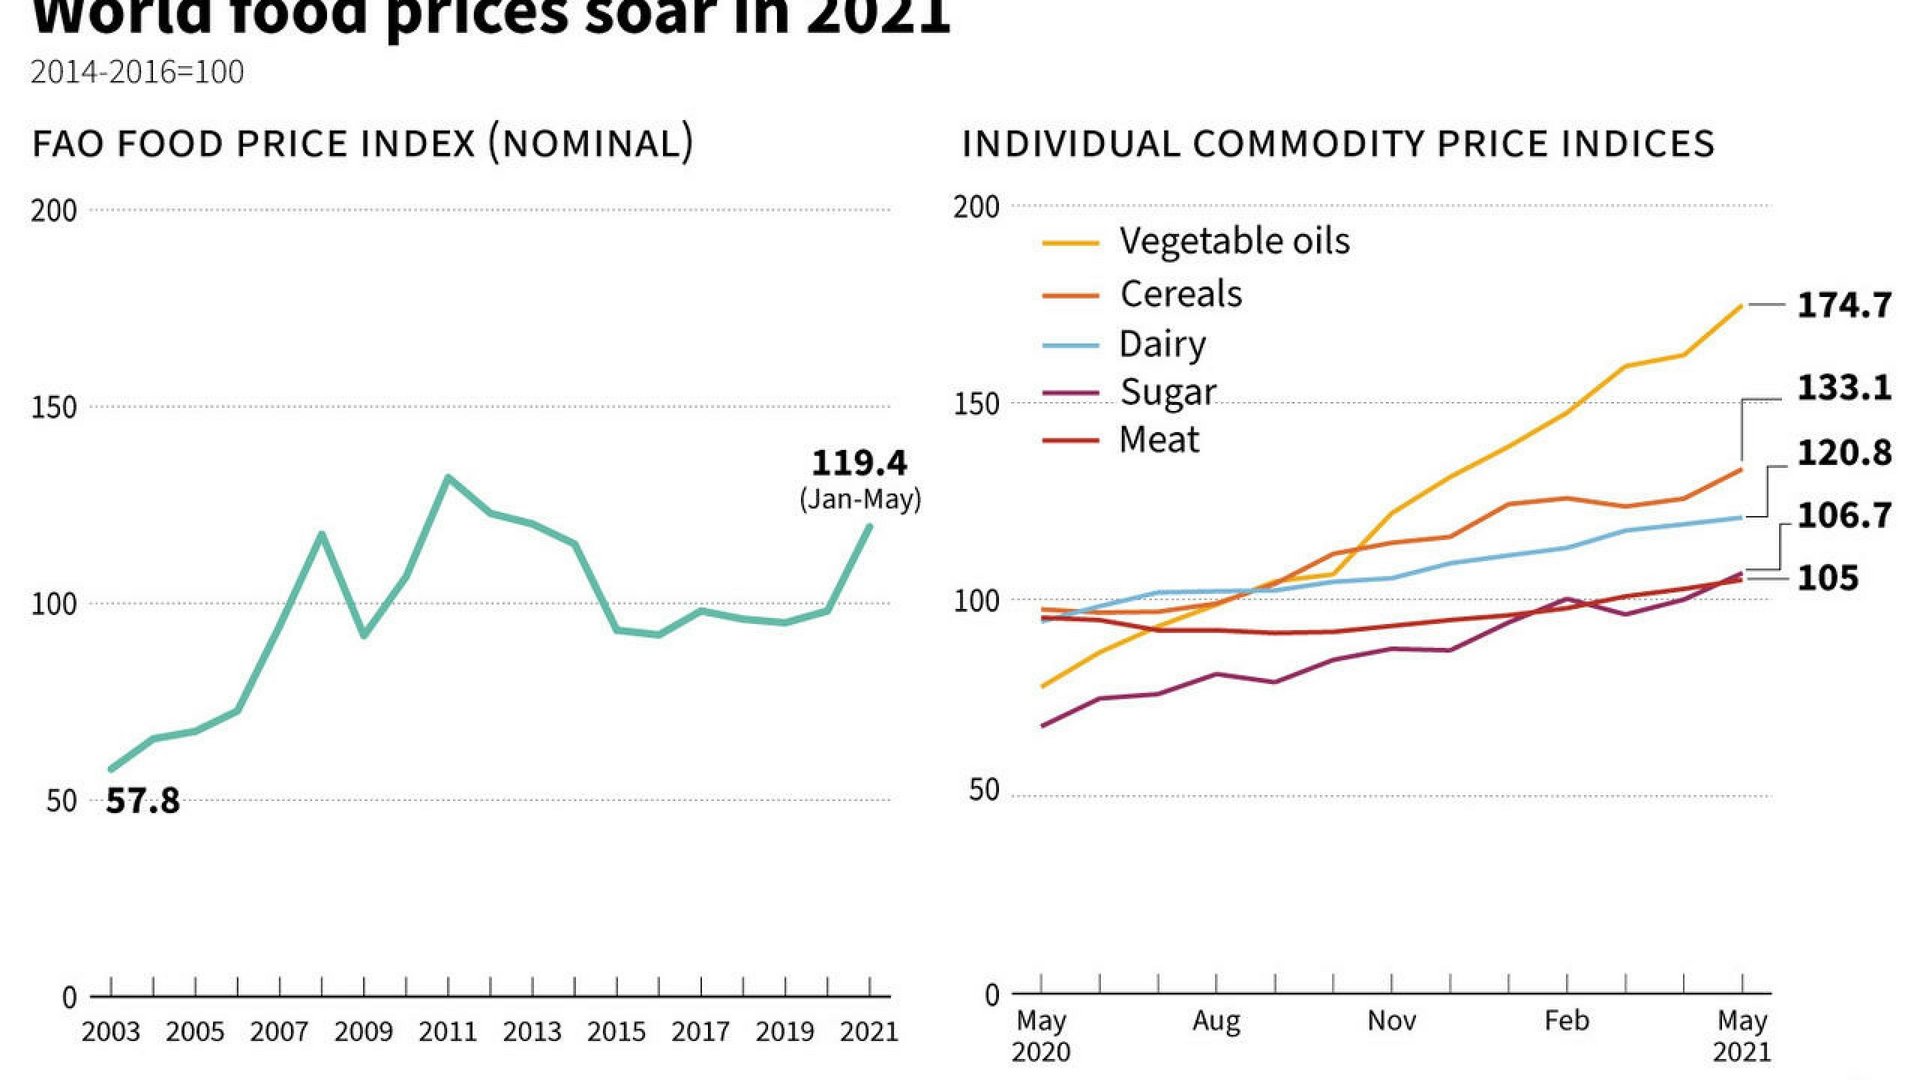 image World food prices, already inflated, skyrocket as freight costs climb